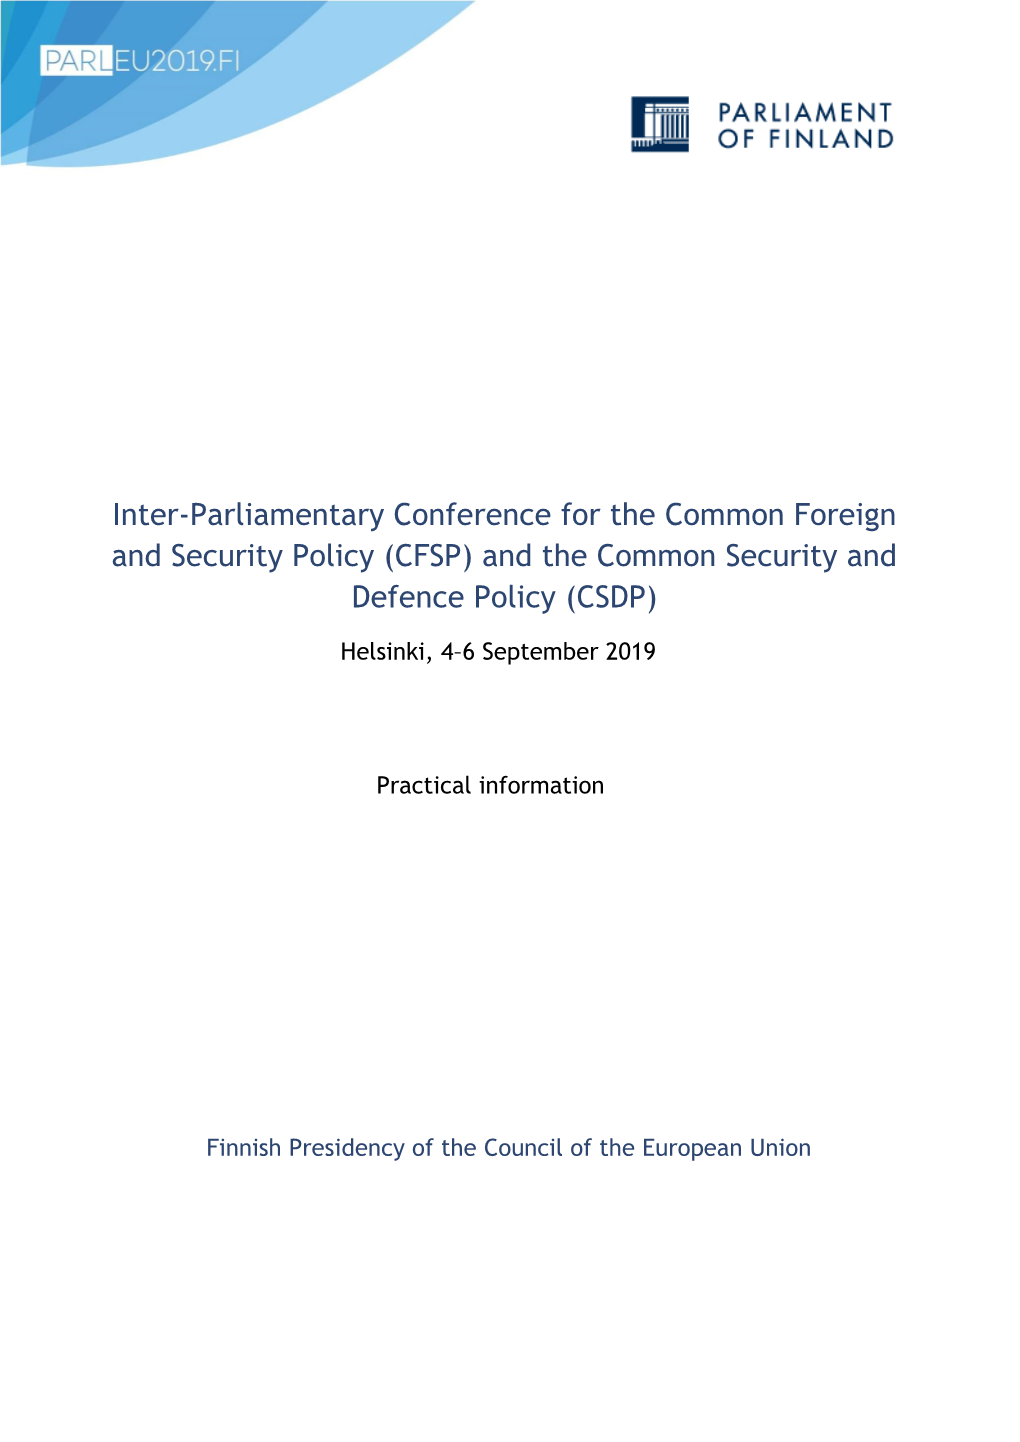 CFSP) and the Common Security and Defence Policy (CSDP)